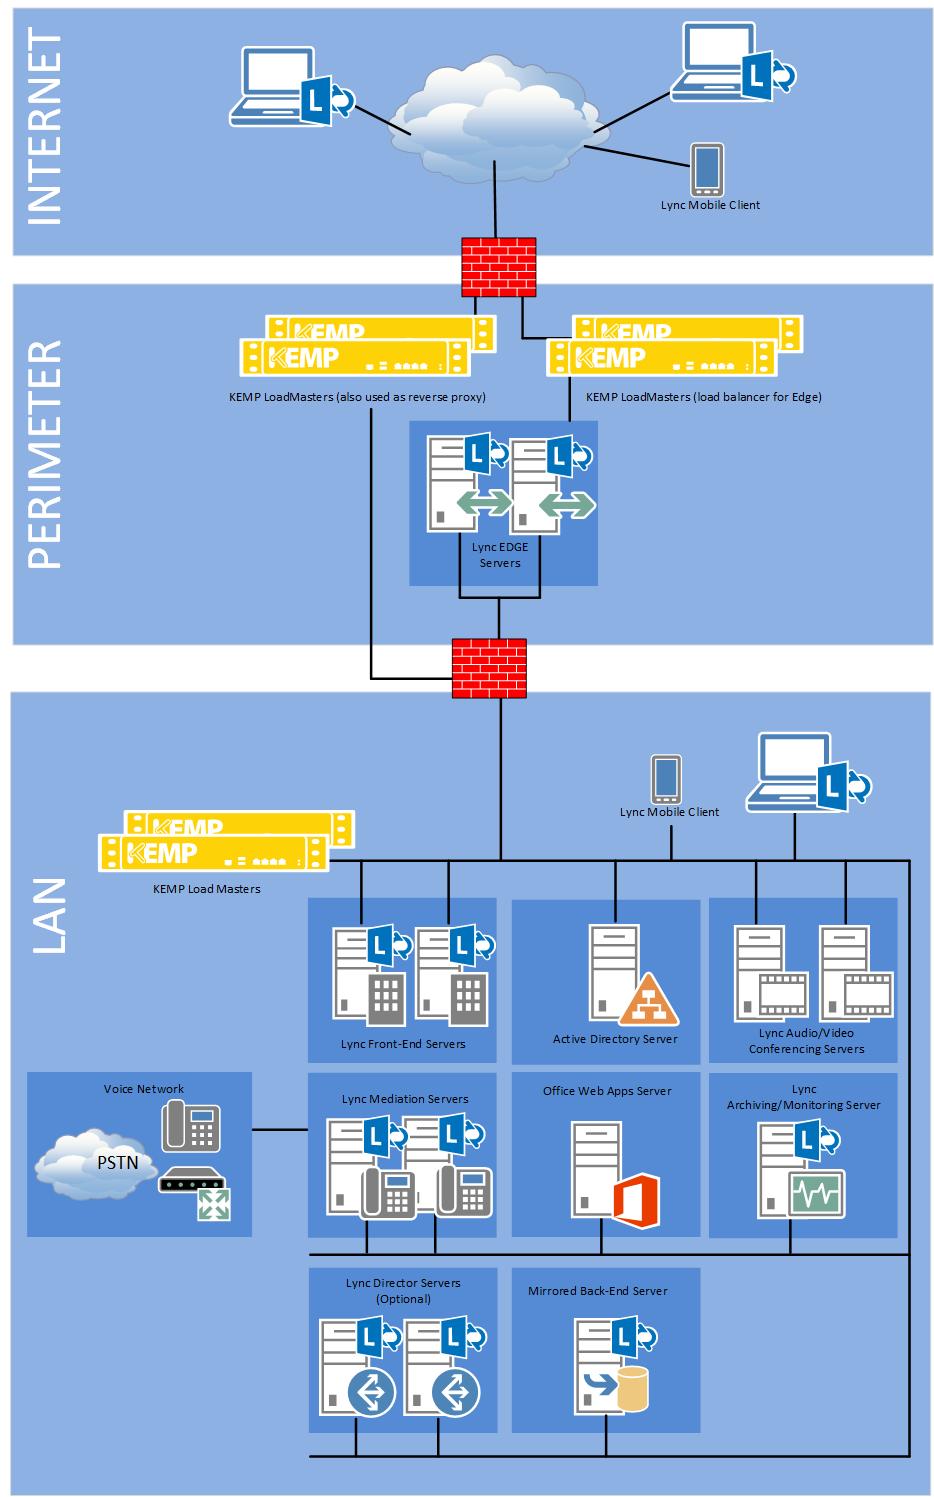 2 Load Balancing Microsoft Lync 2013 2 Load Balancing Microsoft Lync 2013 Deploying a Microsoft Lync environment can require multiple servers in Front-End pools and Edge